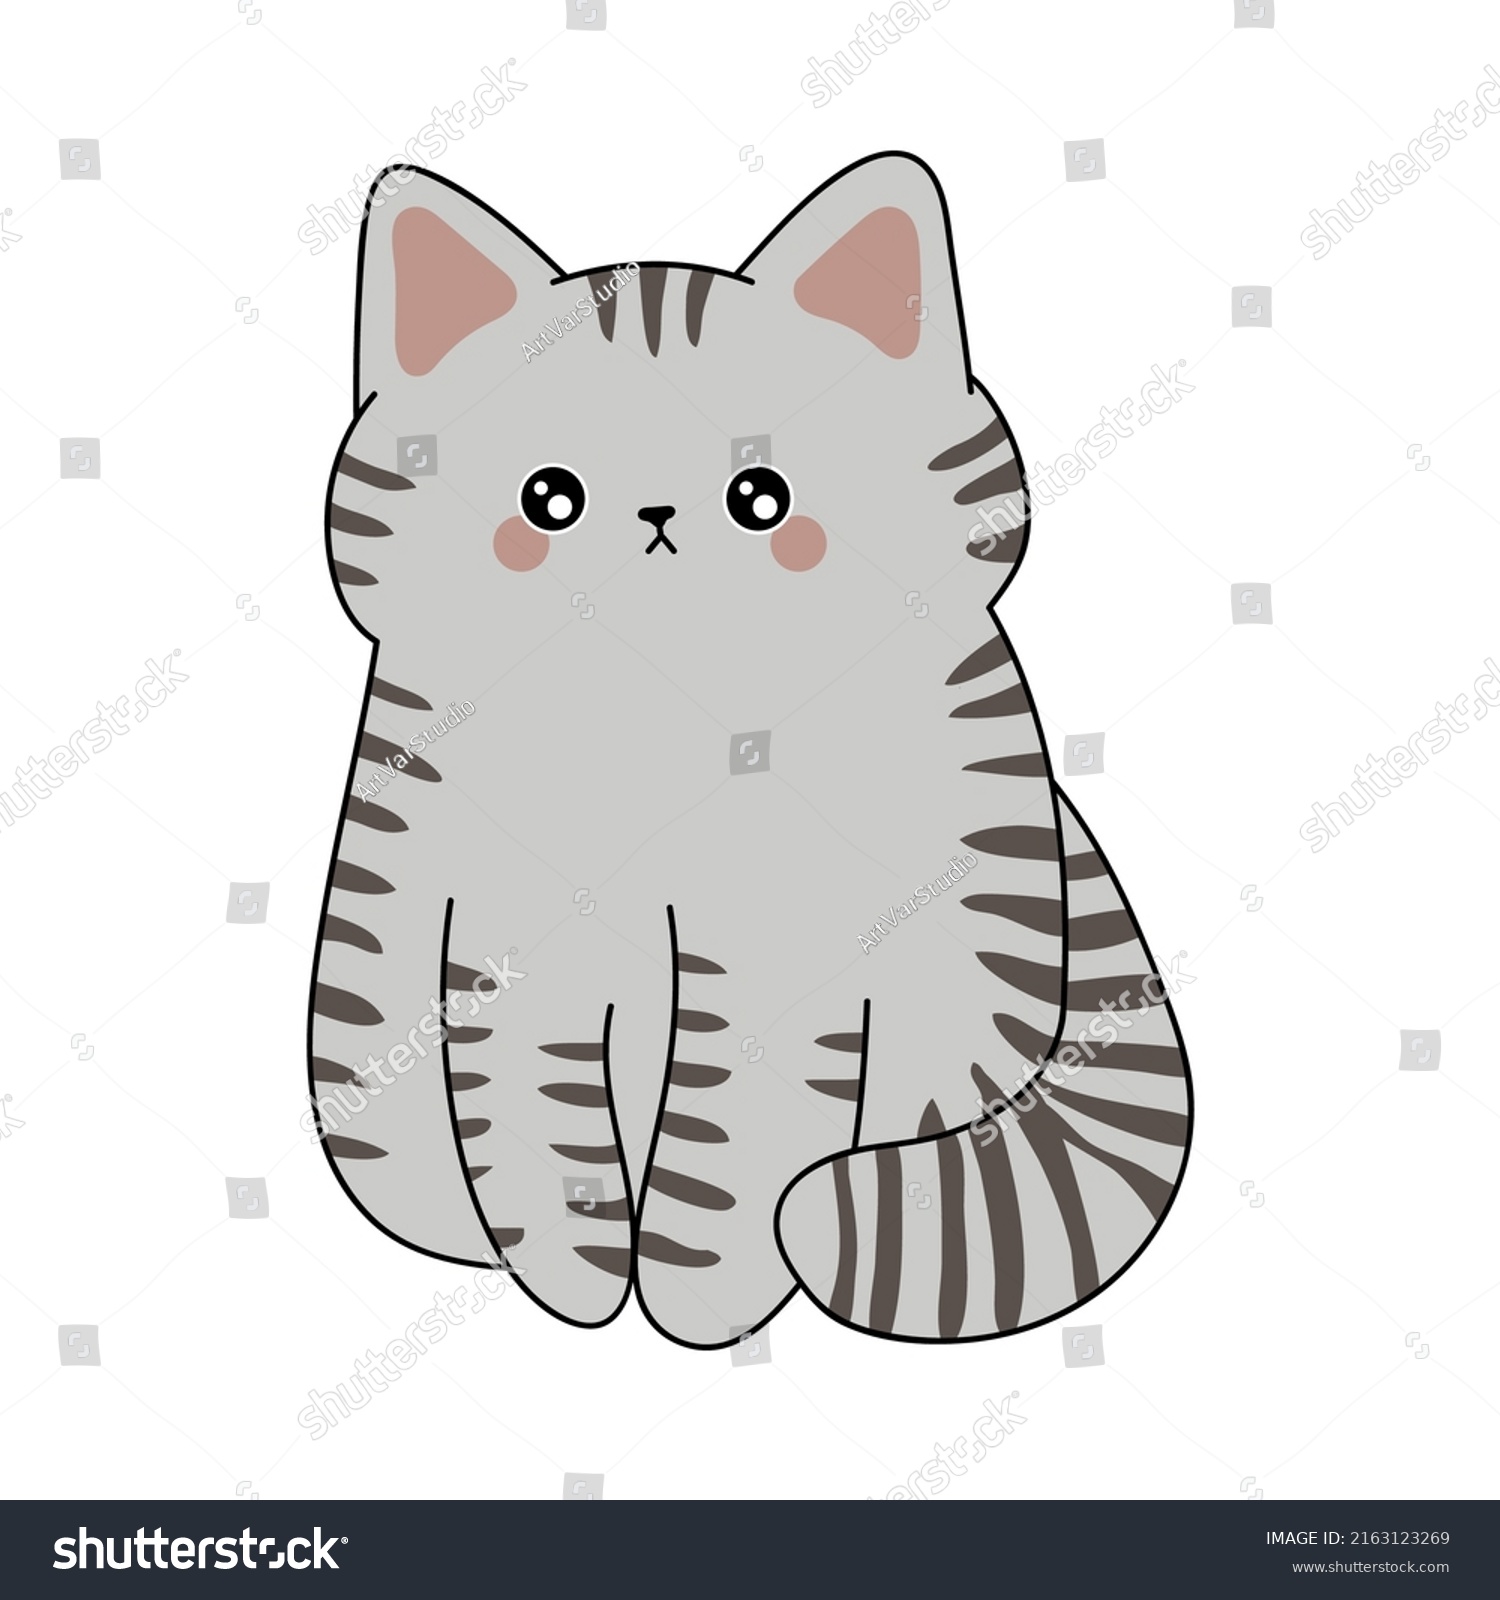 SVG of Shorthair cute cat. Vector illustration of a cute kitten. Cute little illustration of cat for kids, baby book, fairy tales, covers, baby shower invitation, textile t-shirt. svg